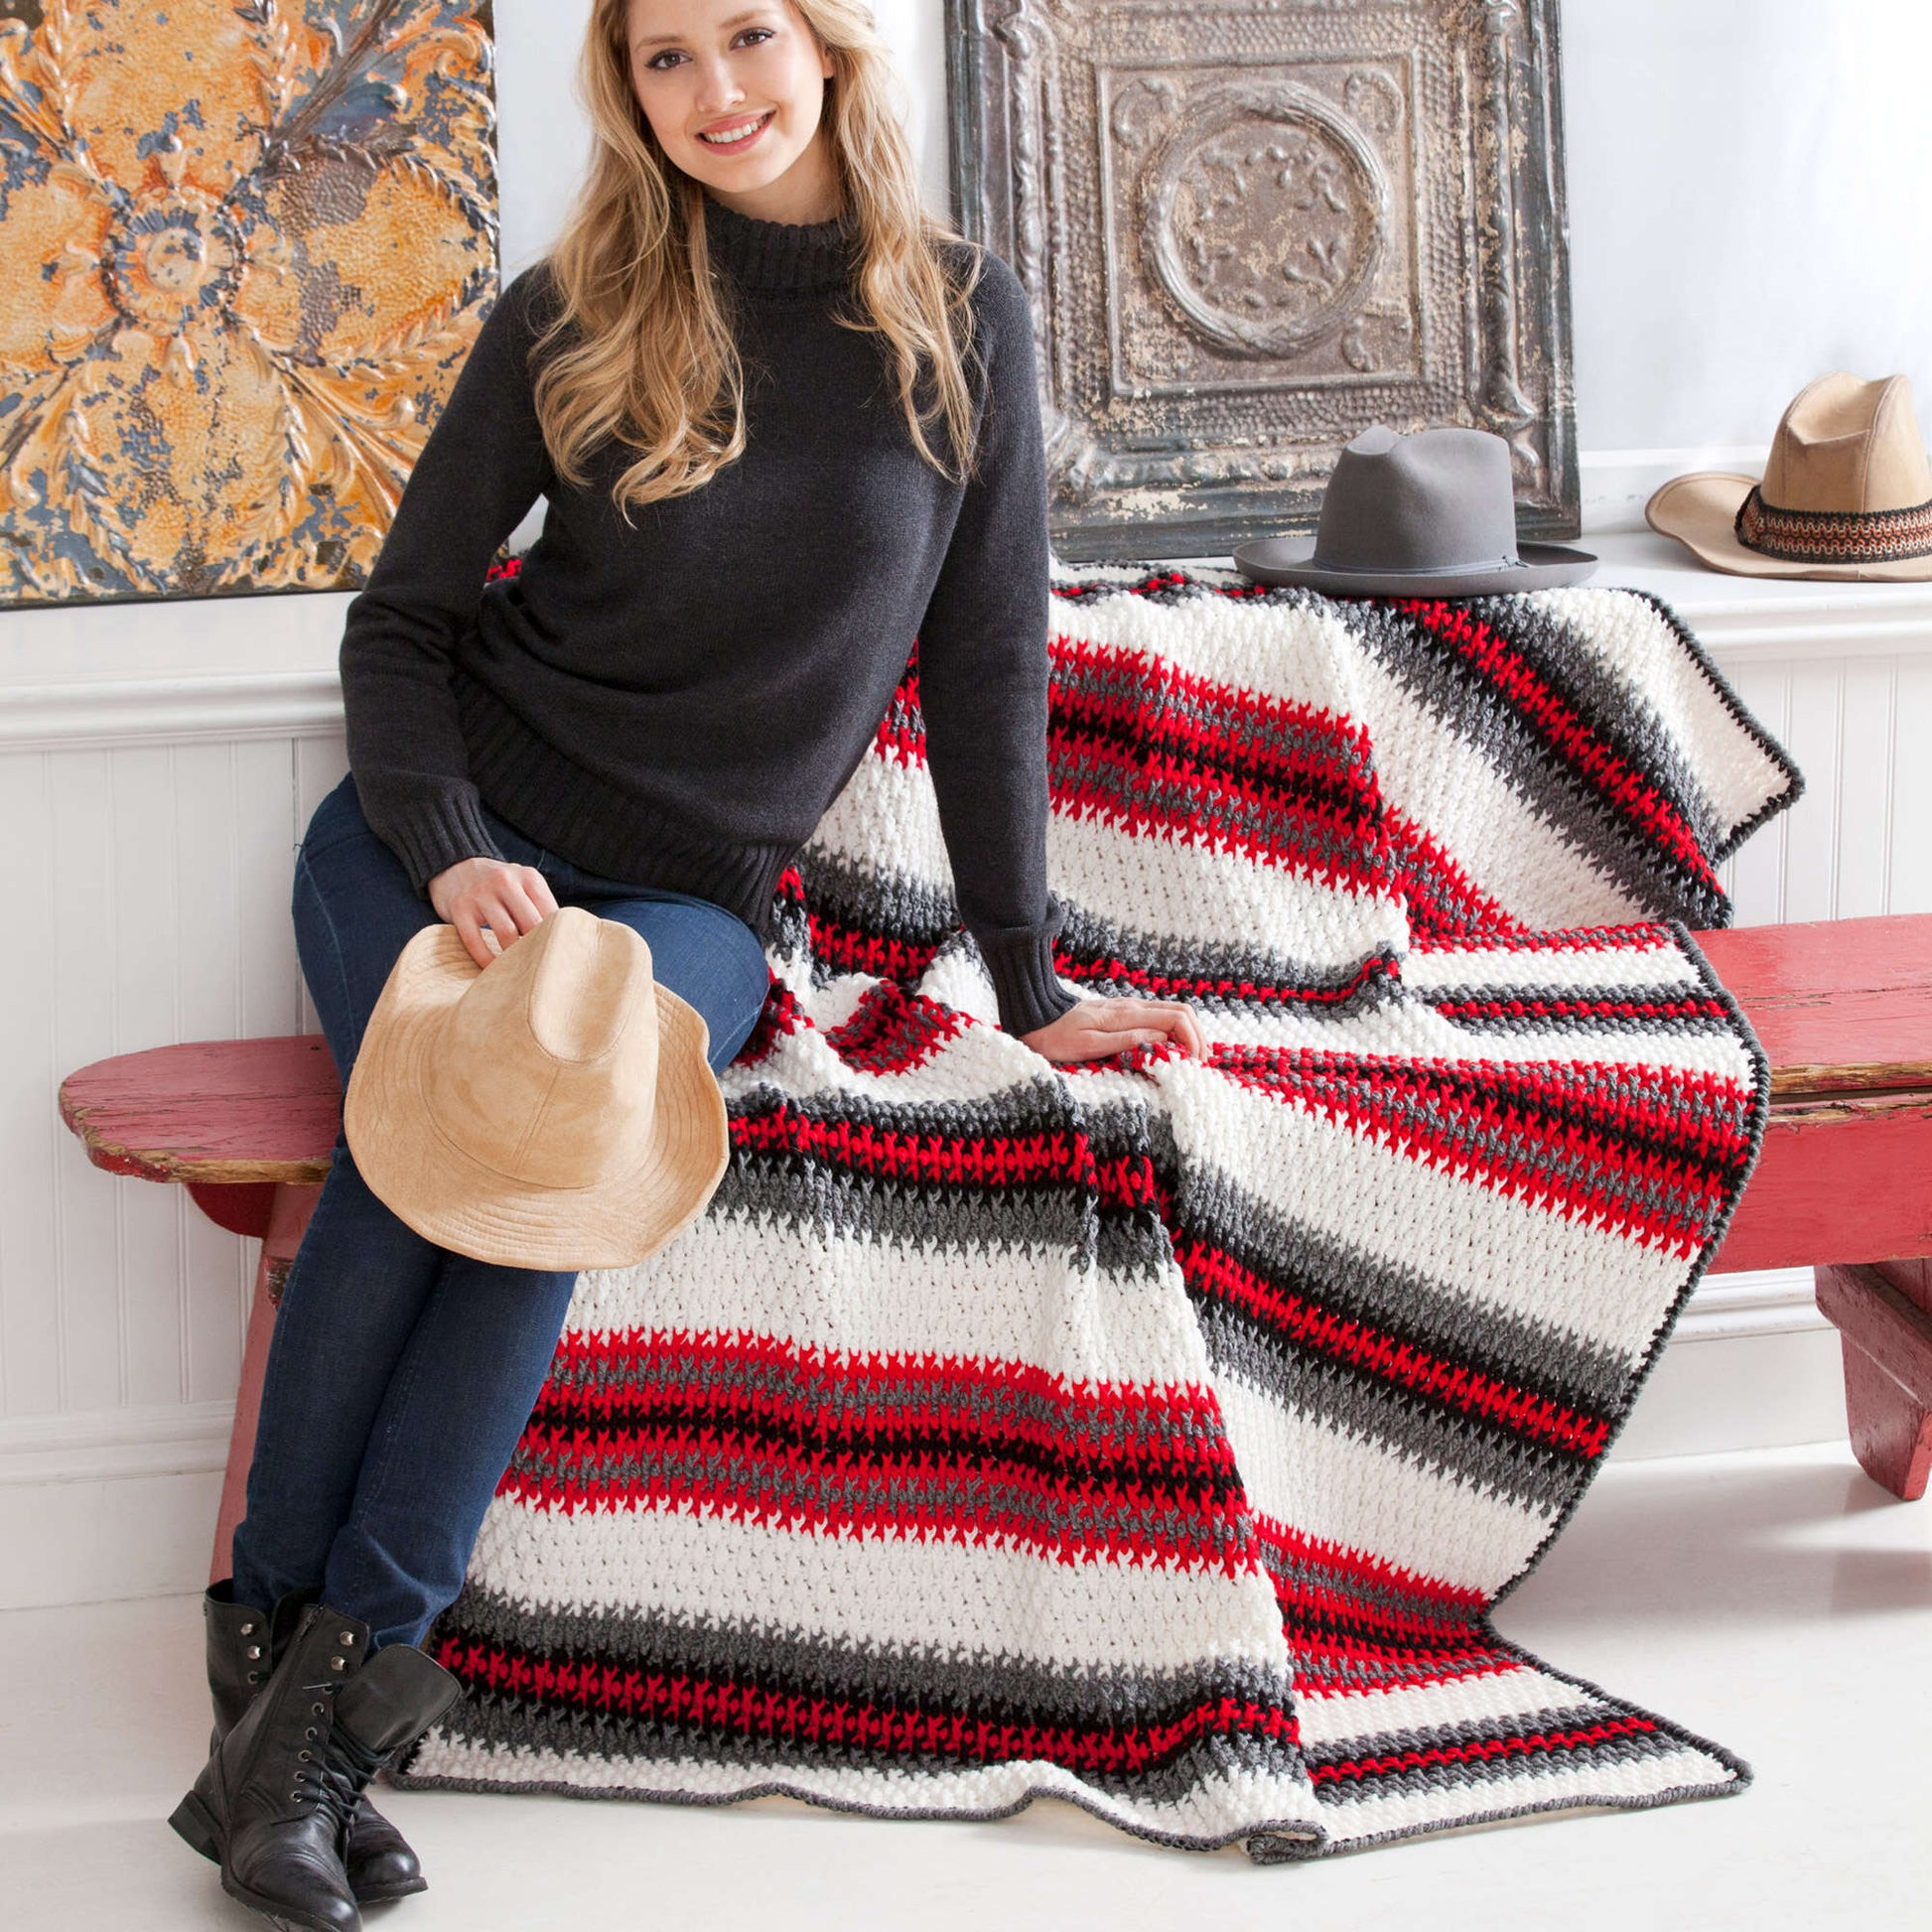 Free Red Heart Crochet Textured Stripes Throw Pattern